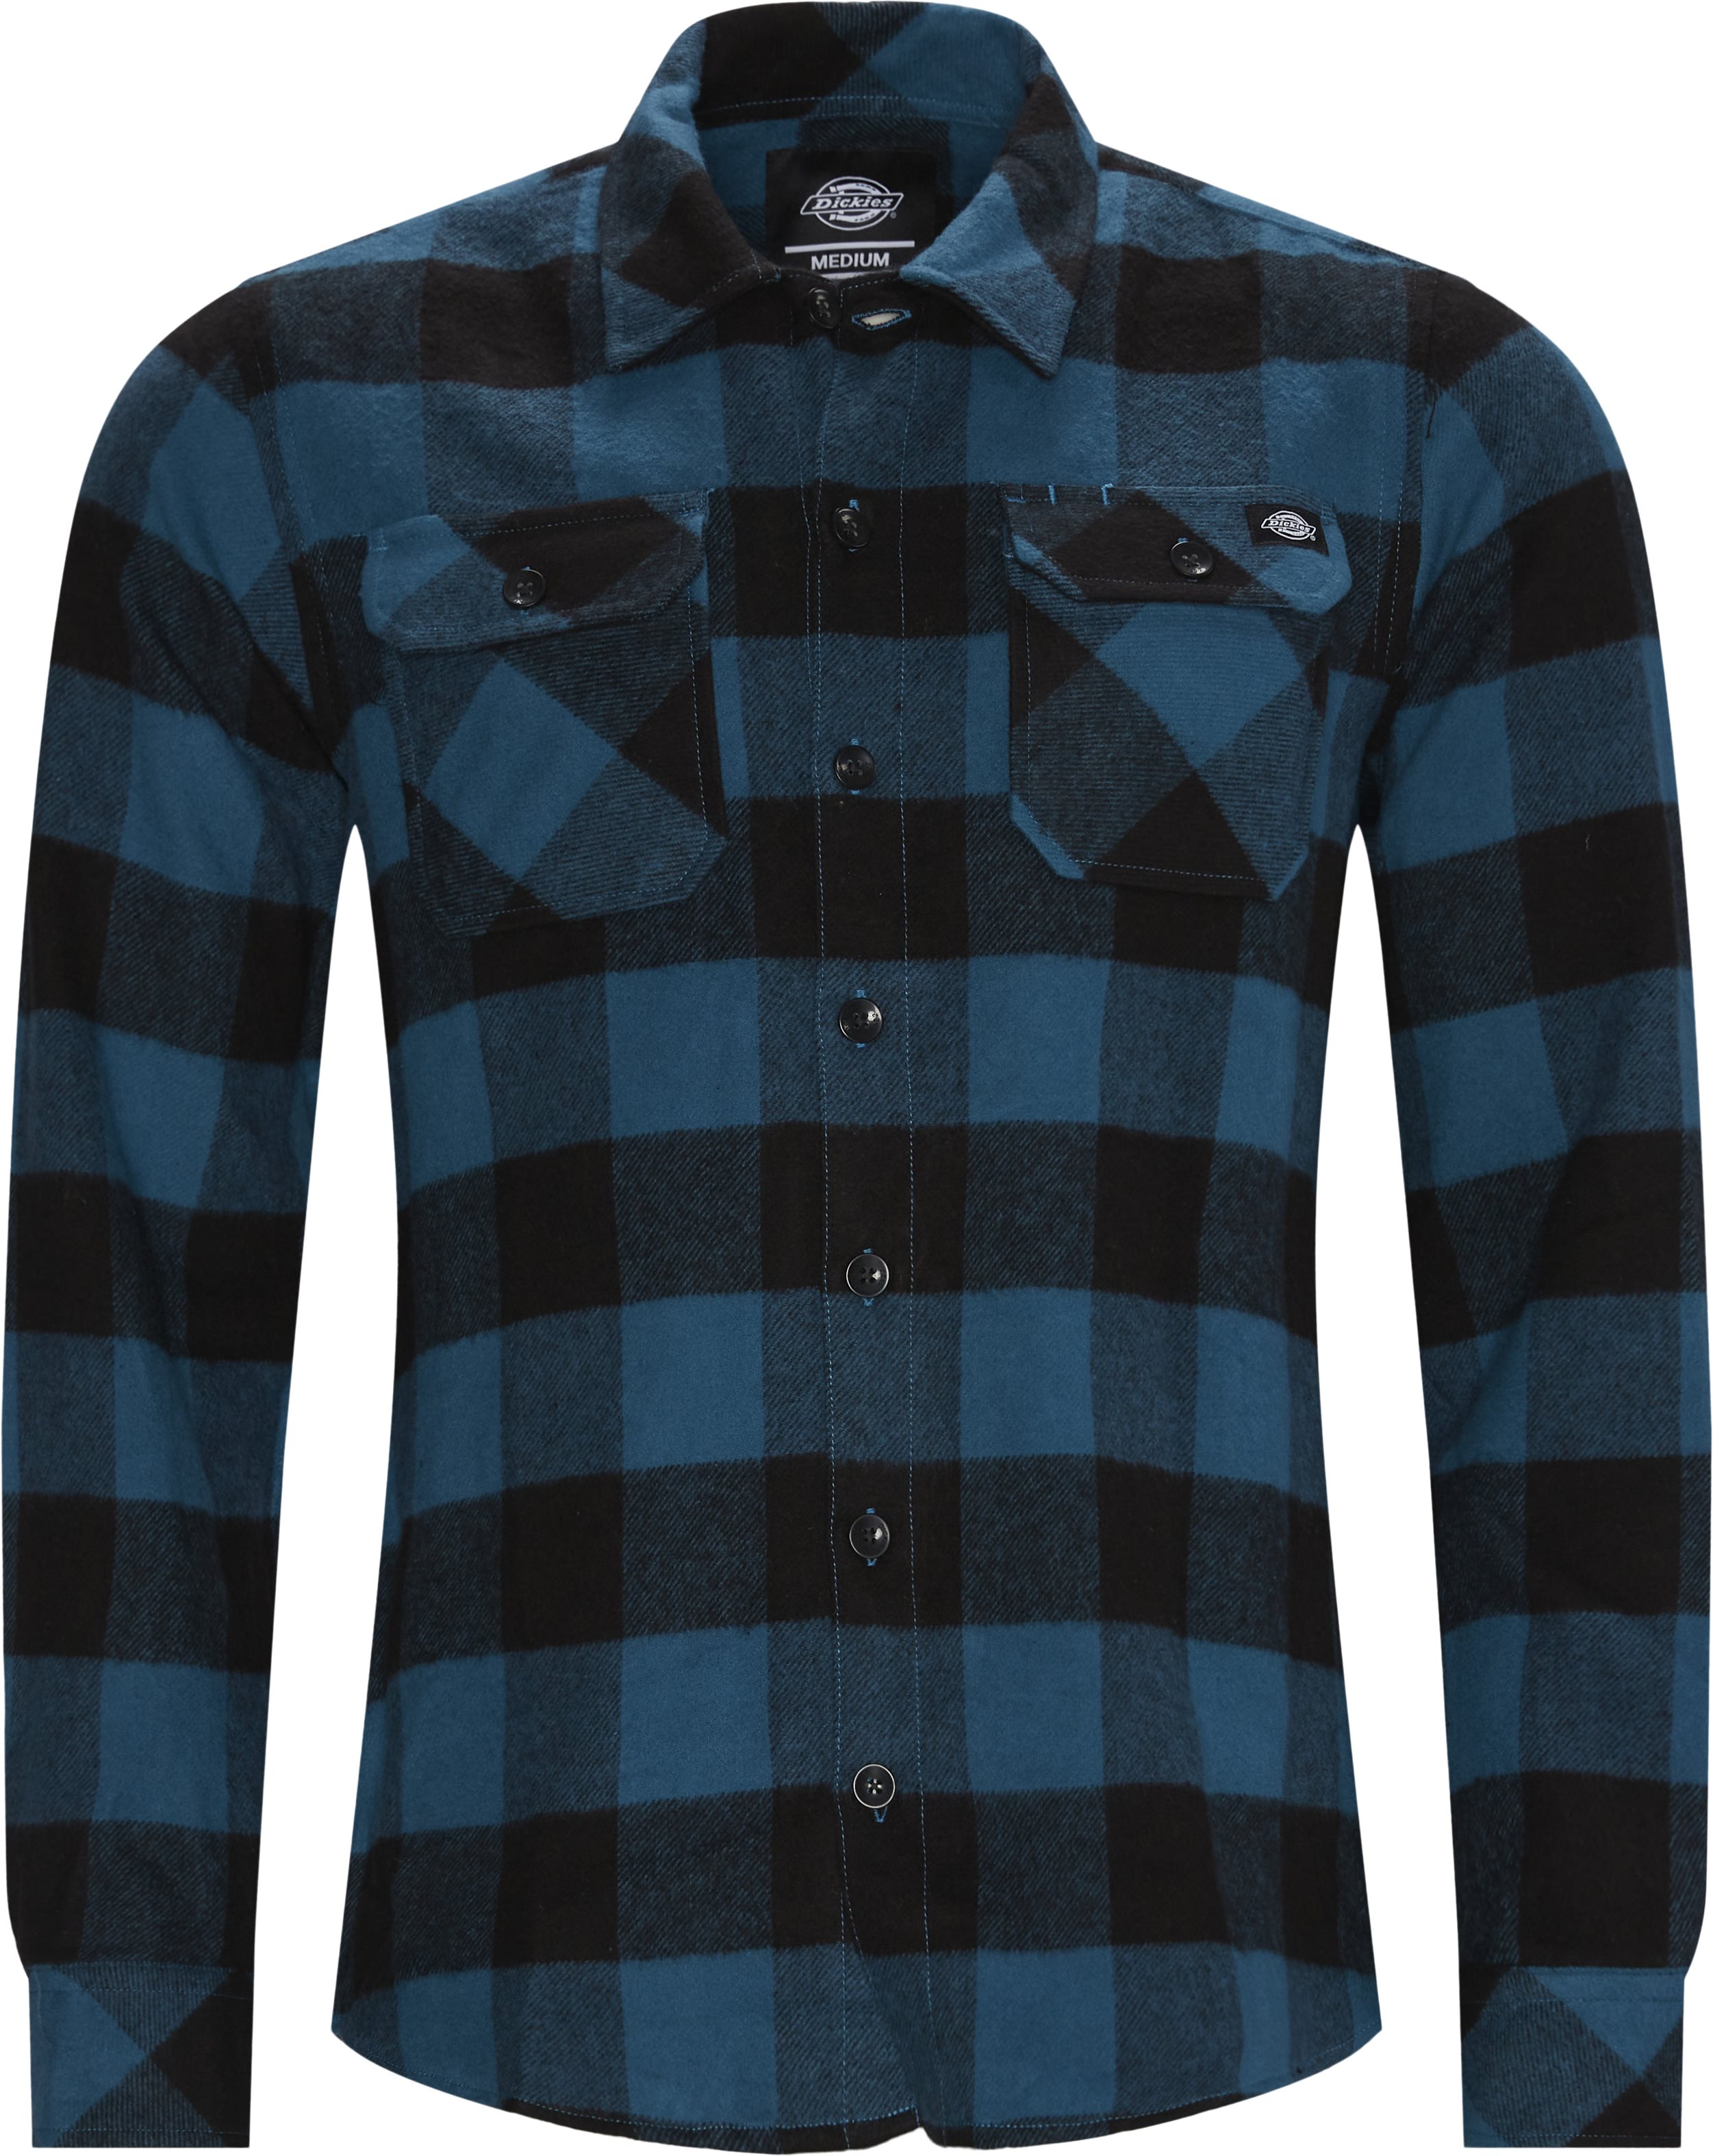 Sacramento Relaxed Shirt - Shirts - Relaxed fit - Blue